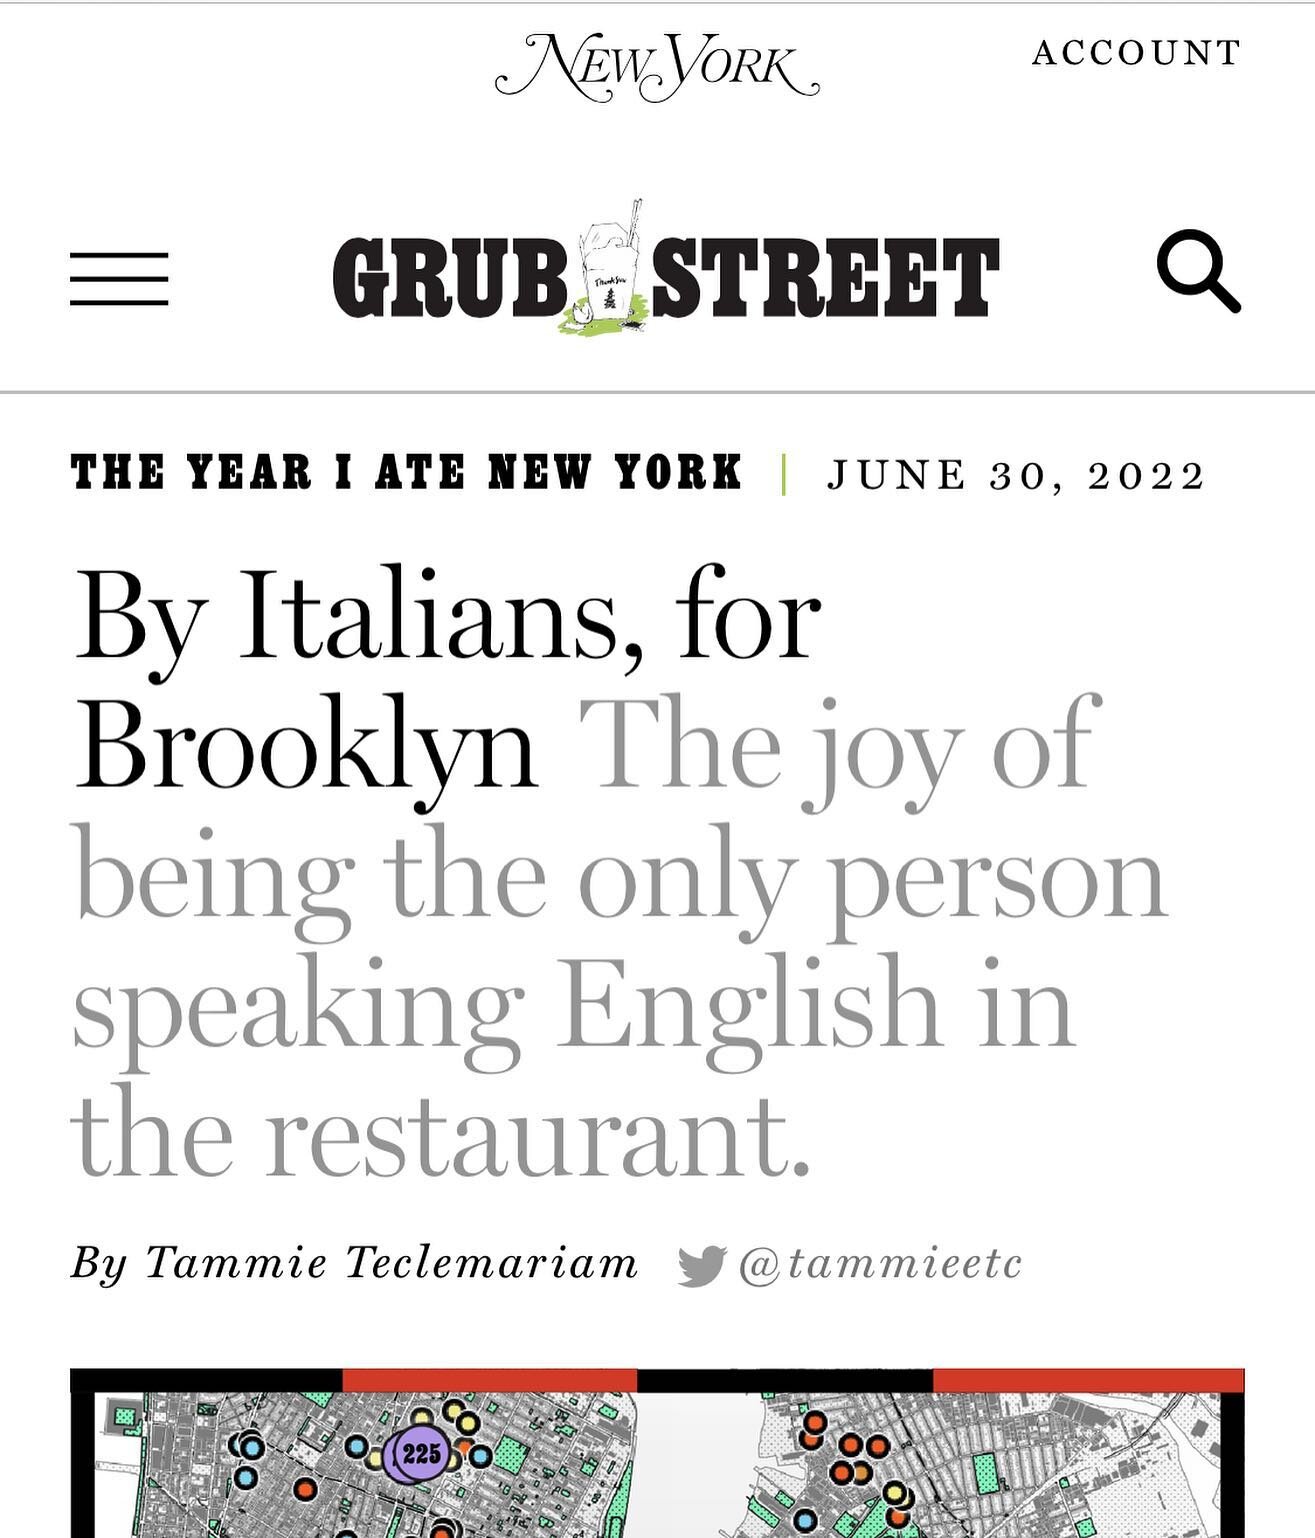 Thank you so much @grubstreet @nymag @tammieeverytime for the shoutout! We have been working hard since 2016 to bring artisanal food, wine and hospitality to the neighborhood so we are really happy to get recognized and appreciated ❤️ By the way I&rs